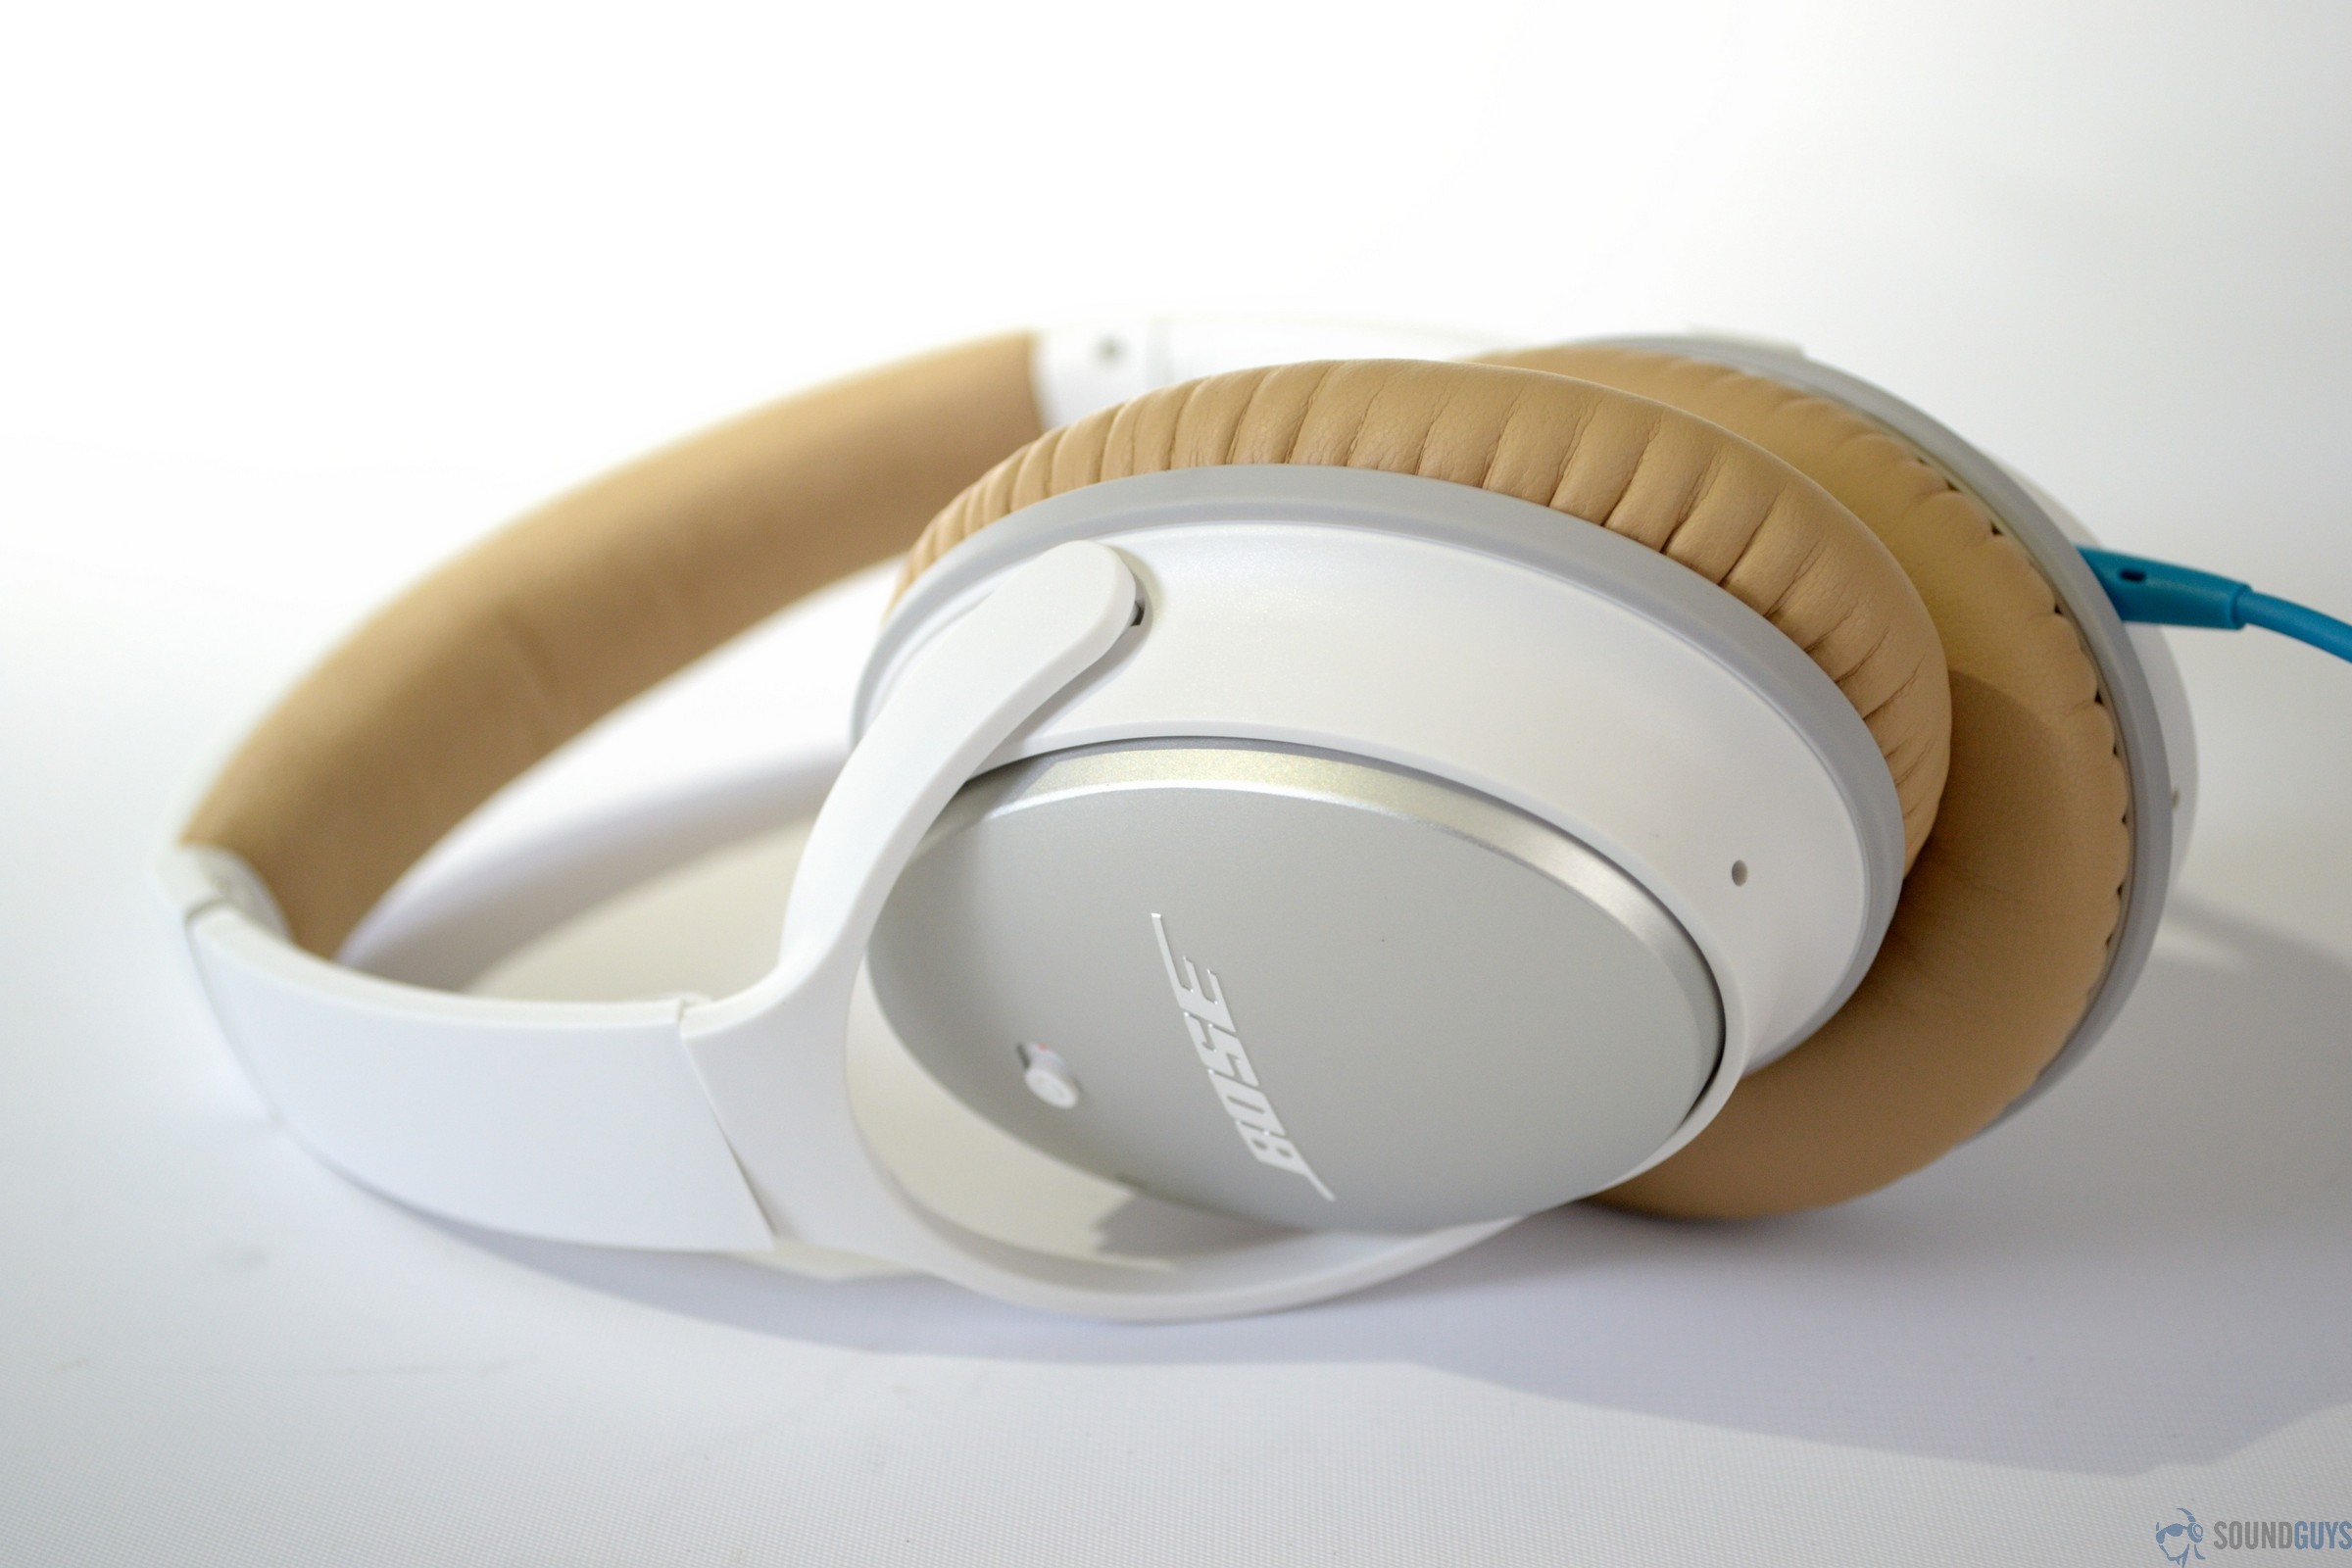 Bose QuietComfort 25 vs 35 Review (which is best?)